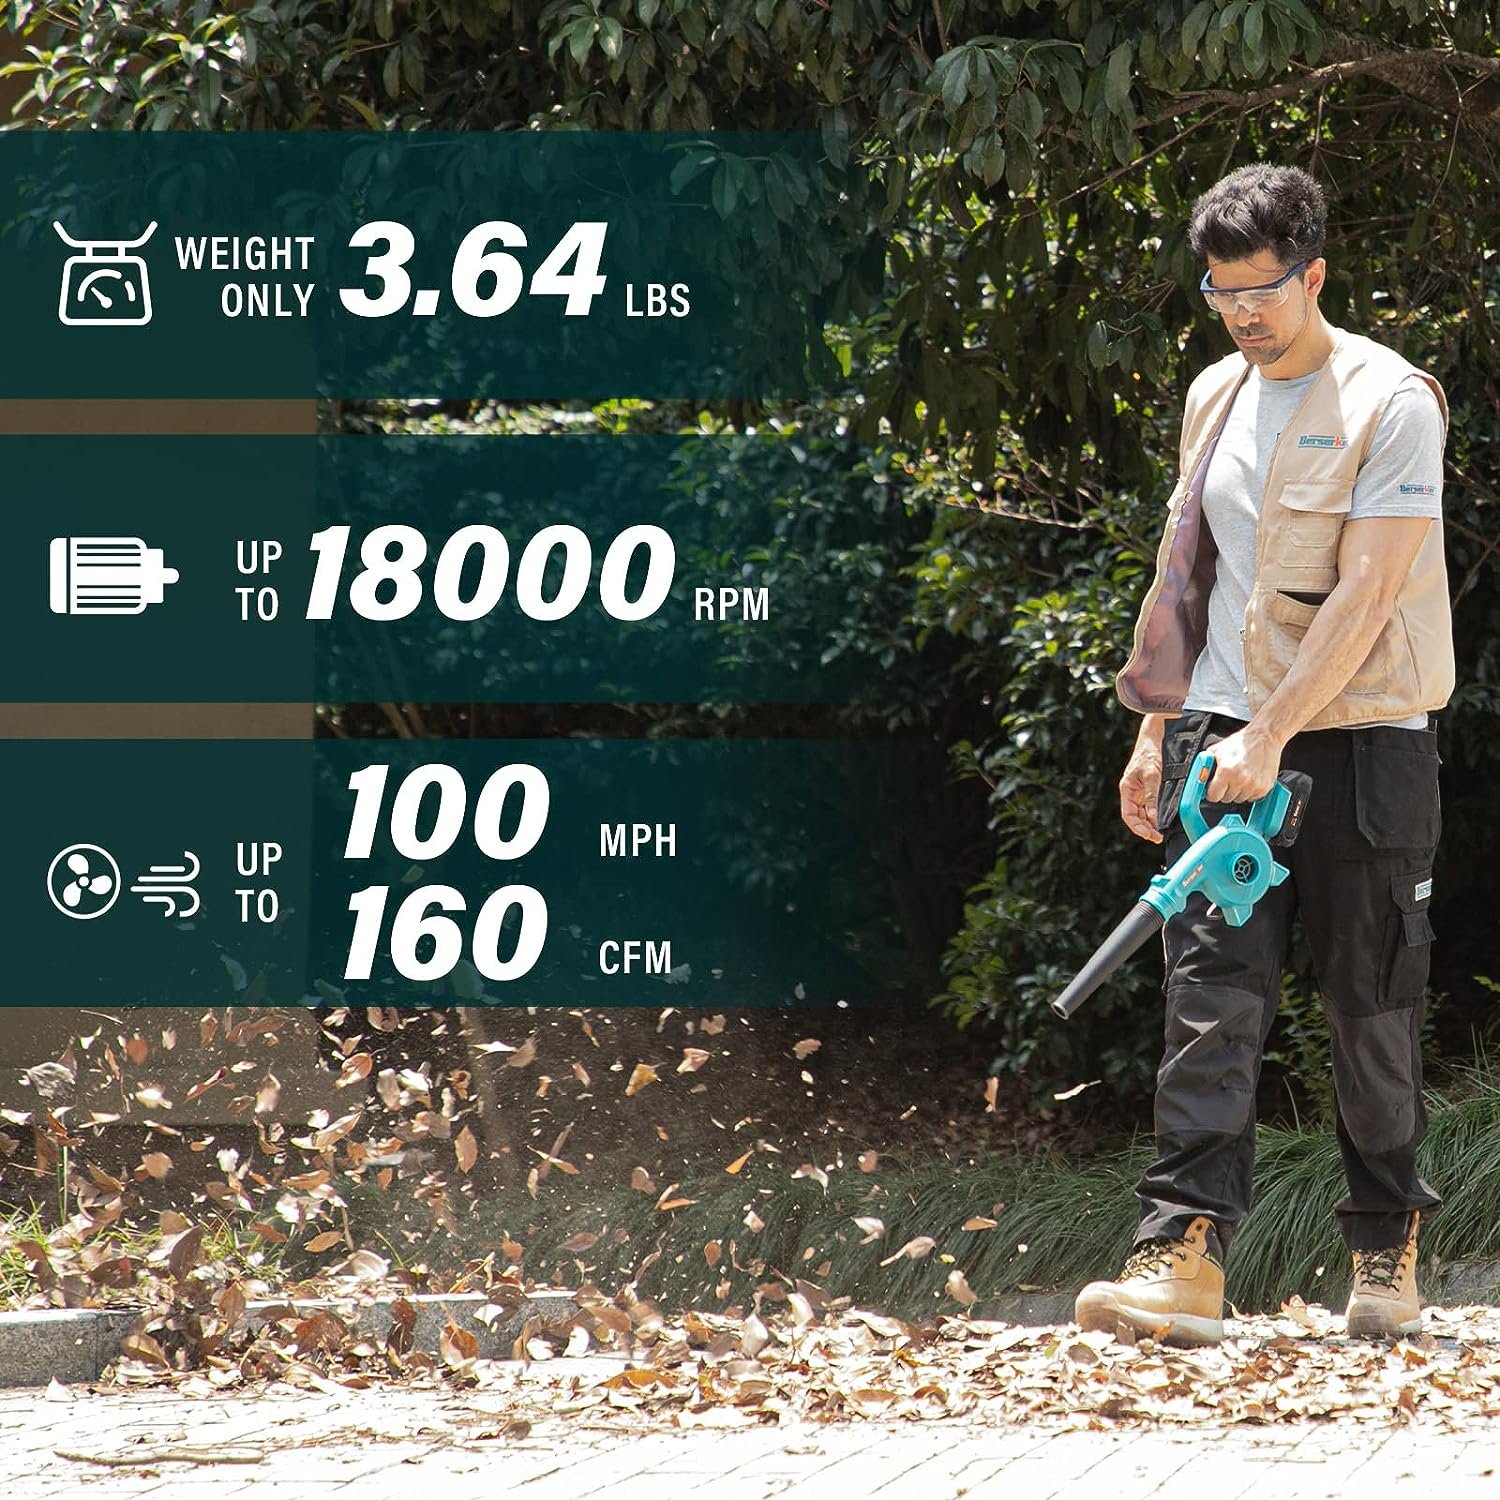 Berserker 20V Leaf Blower Cordless 2.0Ah Battery Operated Review